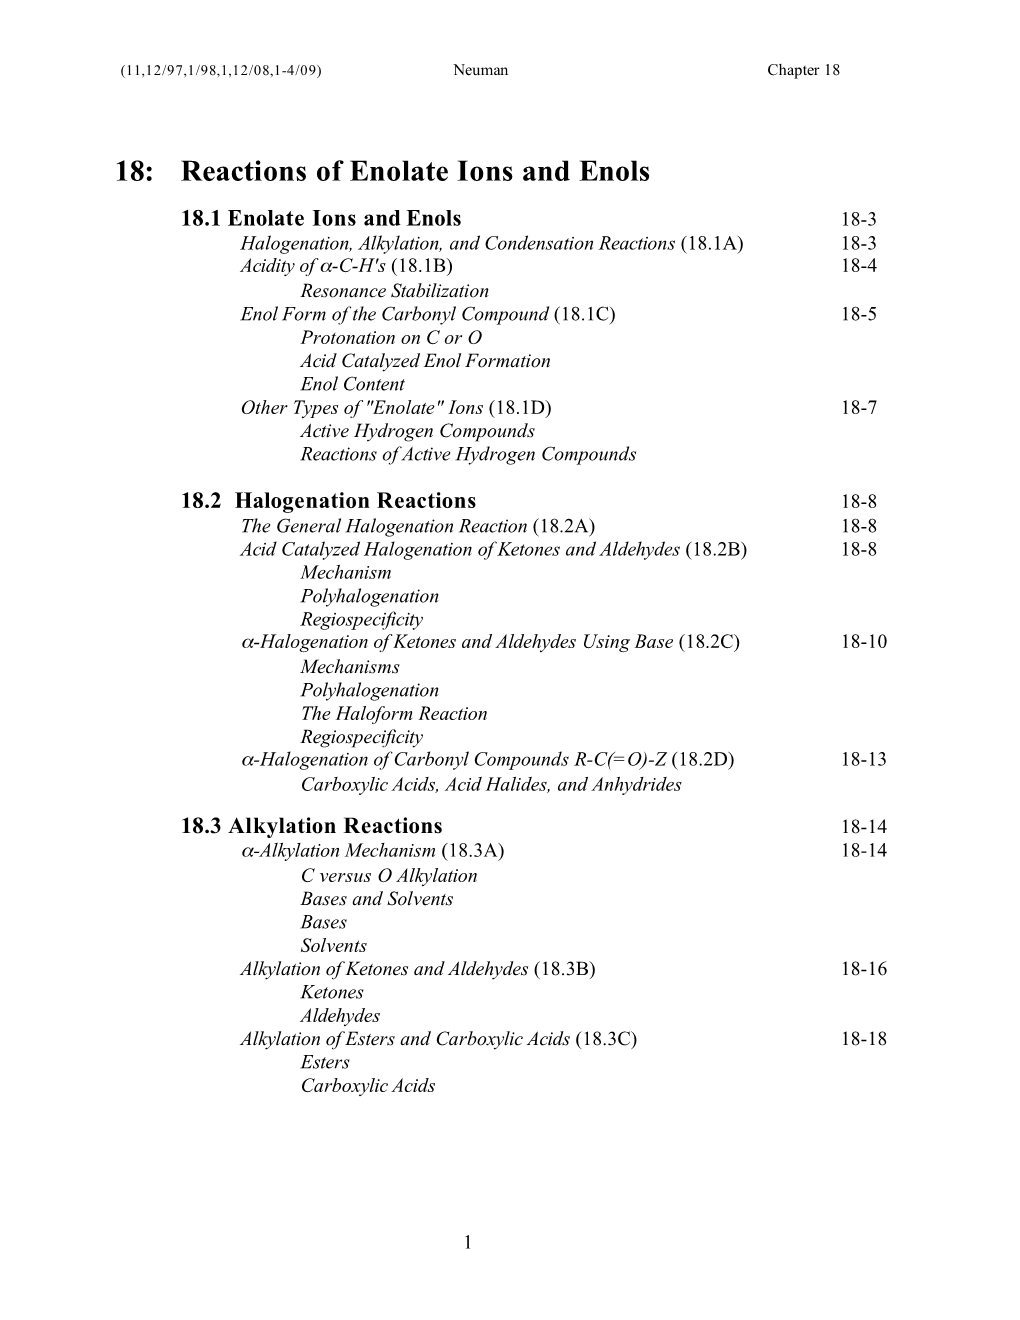 18: Reactions of Enolate Ions and Enols